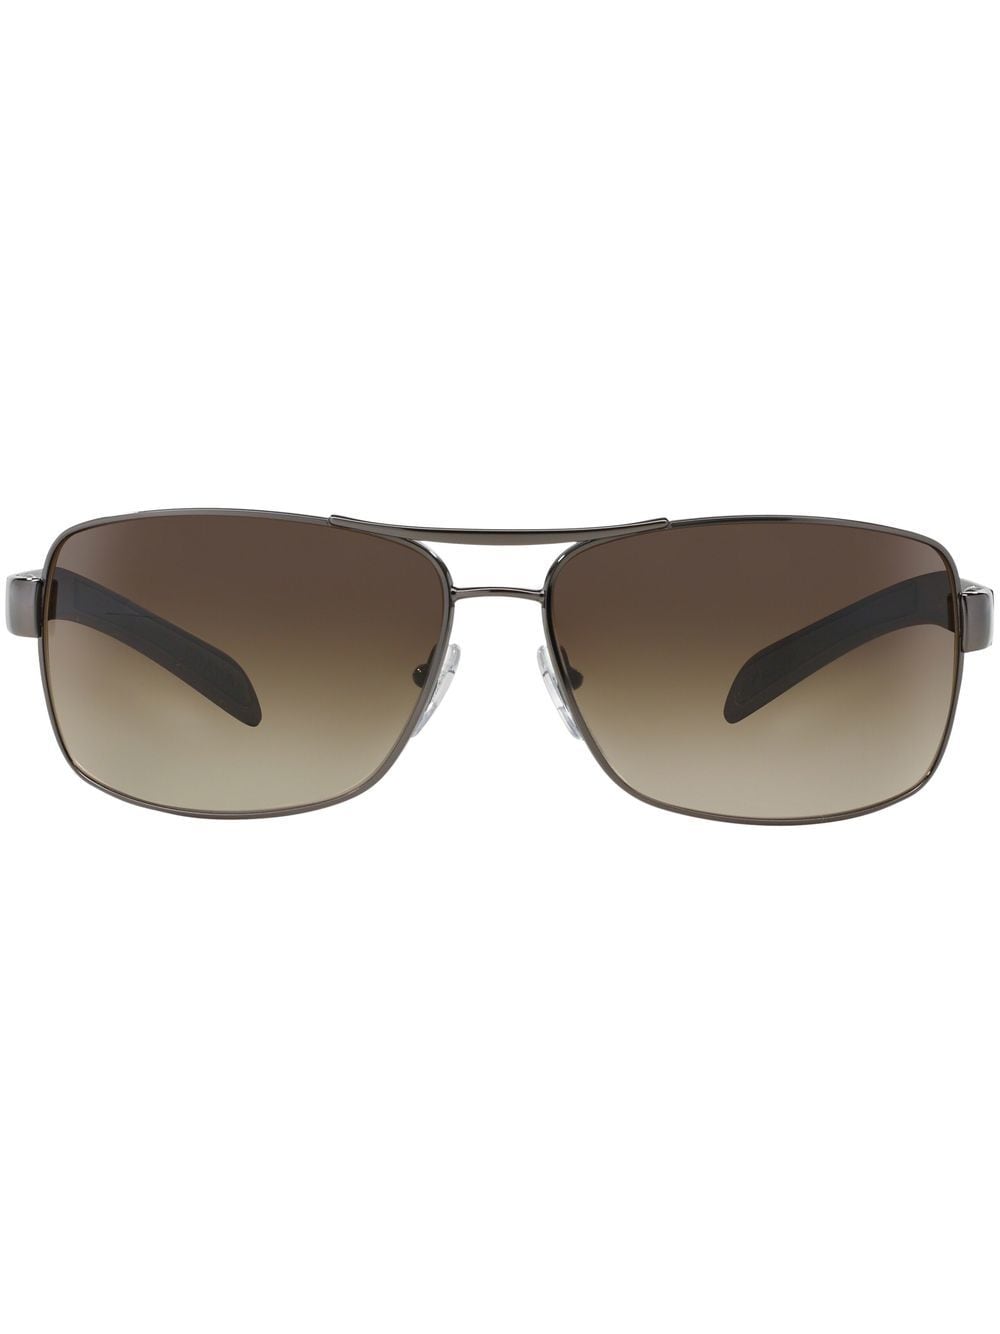 PRADA PS 54IS ROUNDED SUNGLASSES